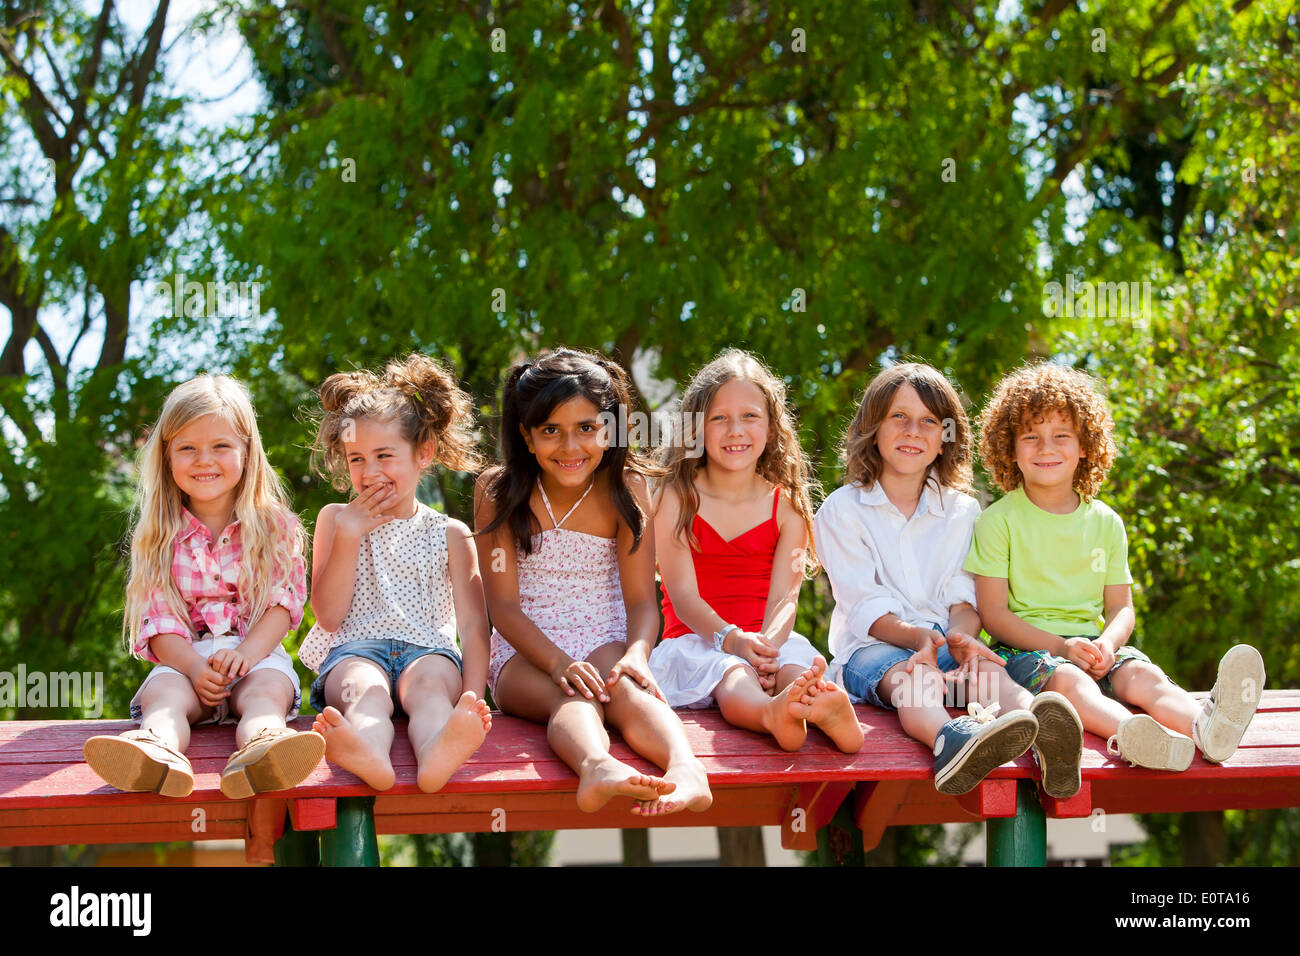 Portrait of happy children sitting together wooden structure in park. Stock Photo